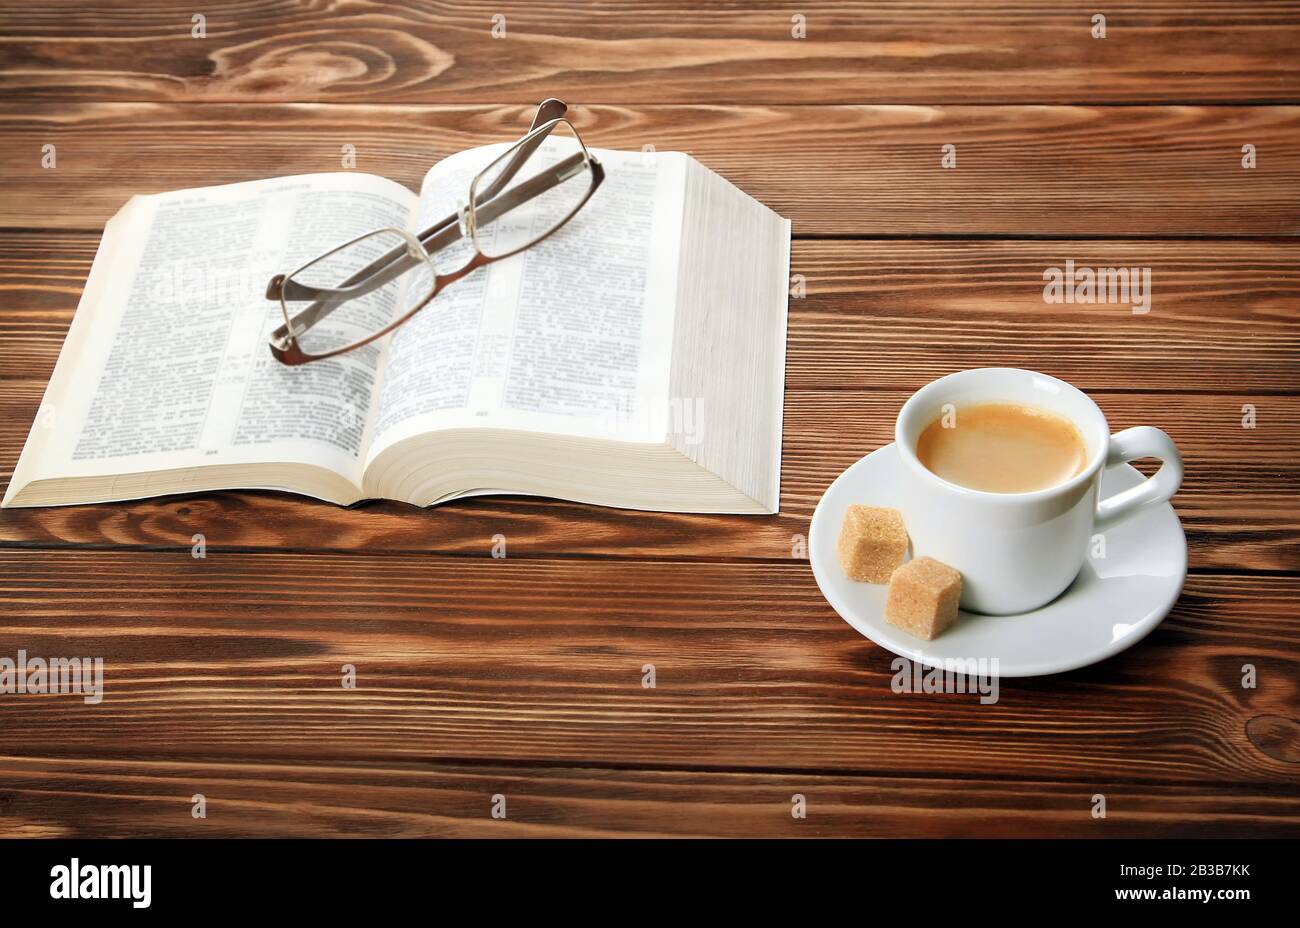 An open book on the table, glasses, a cup of cappuccino coffee with sugar cubes, blue background. Stock Photo